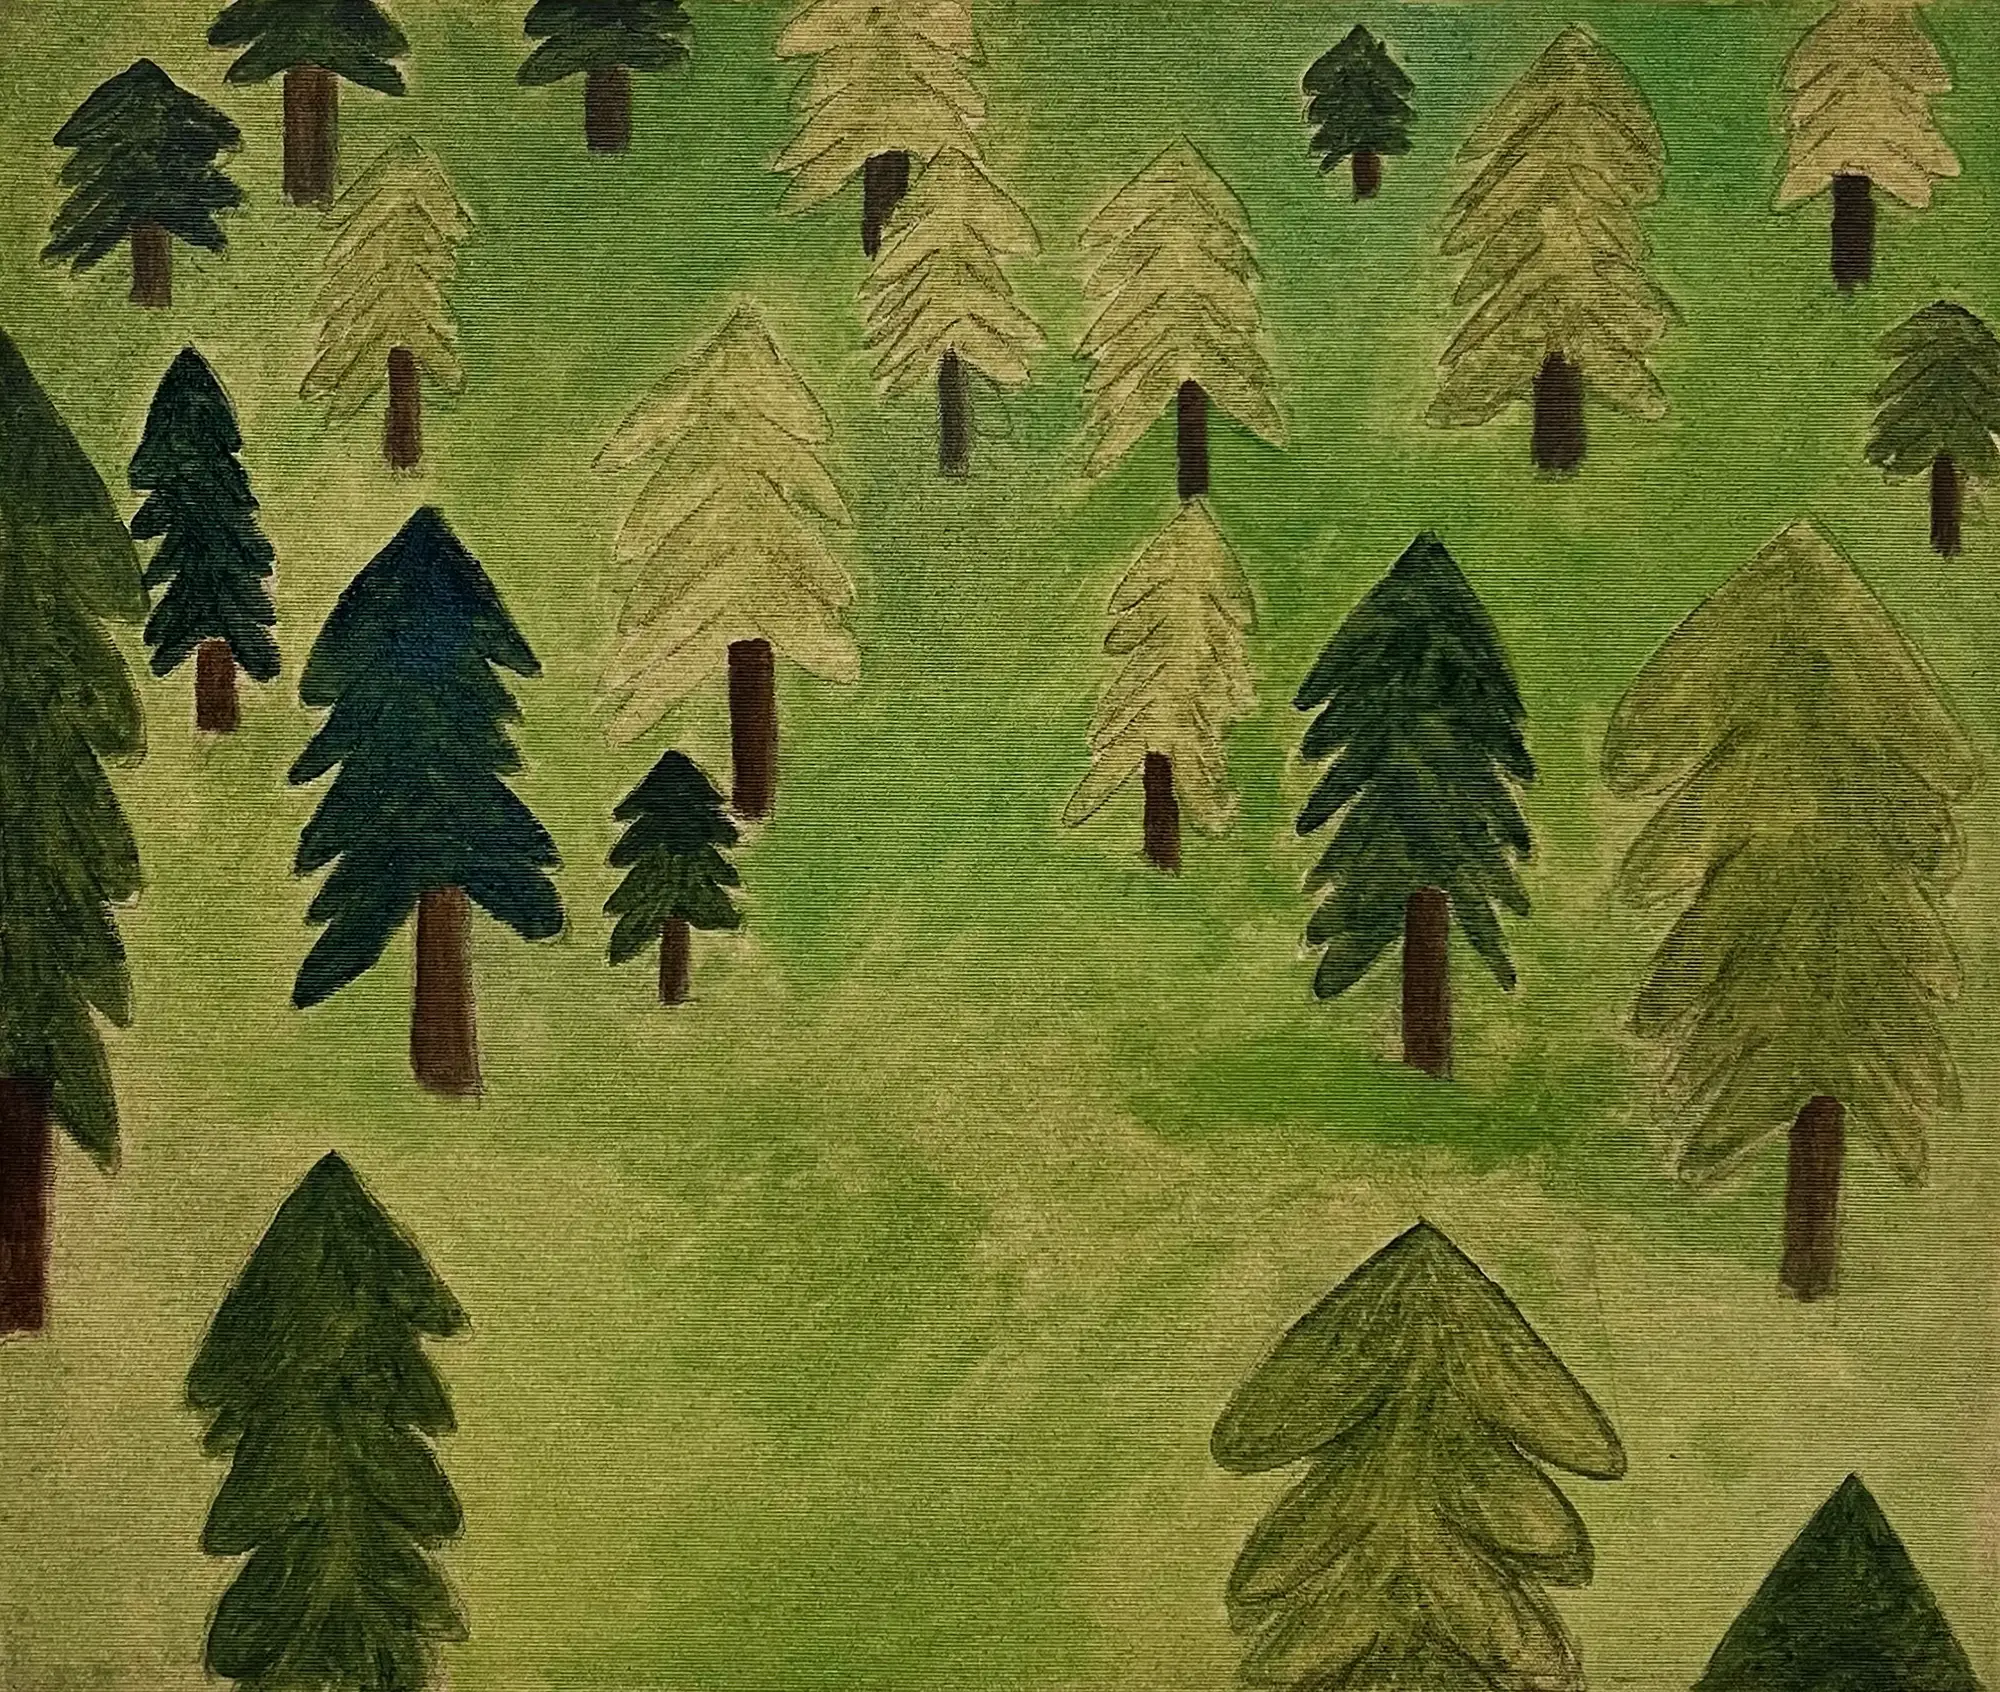 Martin fink, contemporary painting now, forrest, green